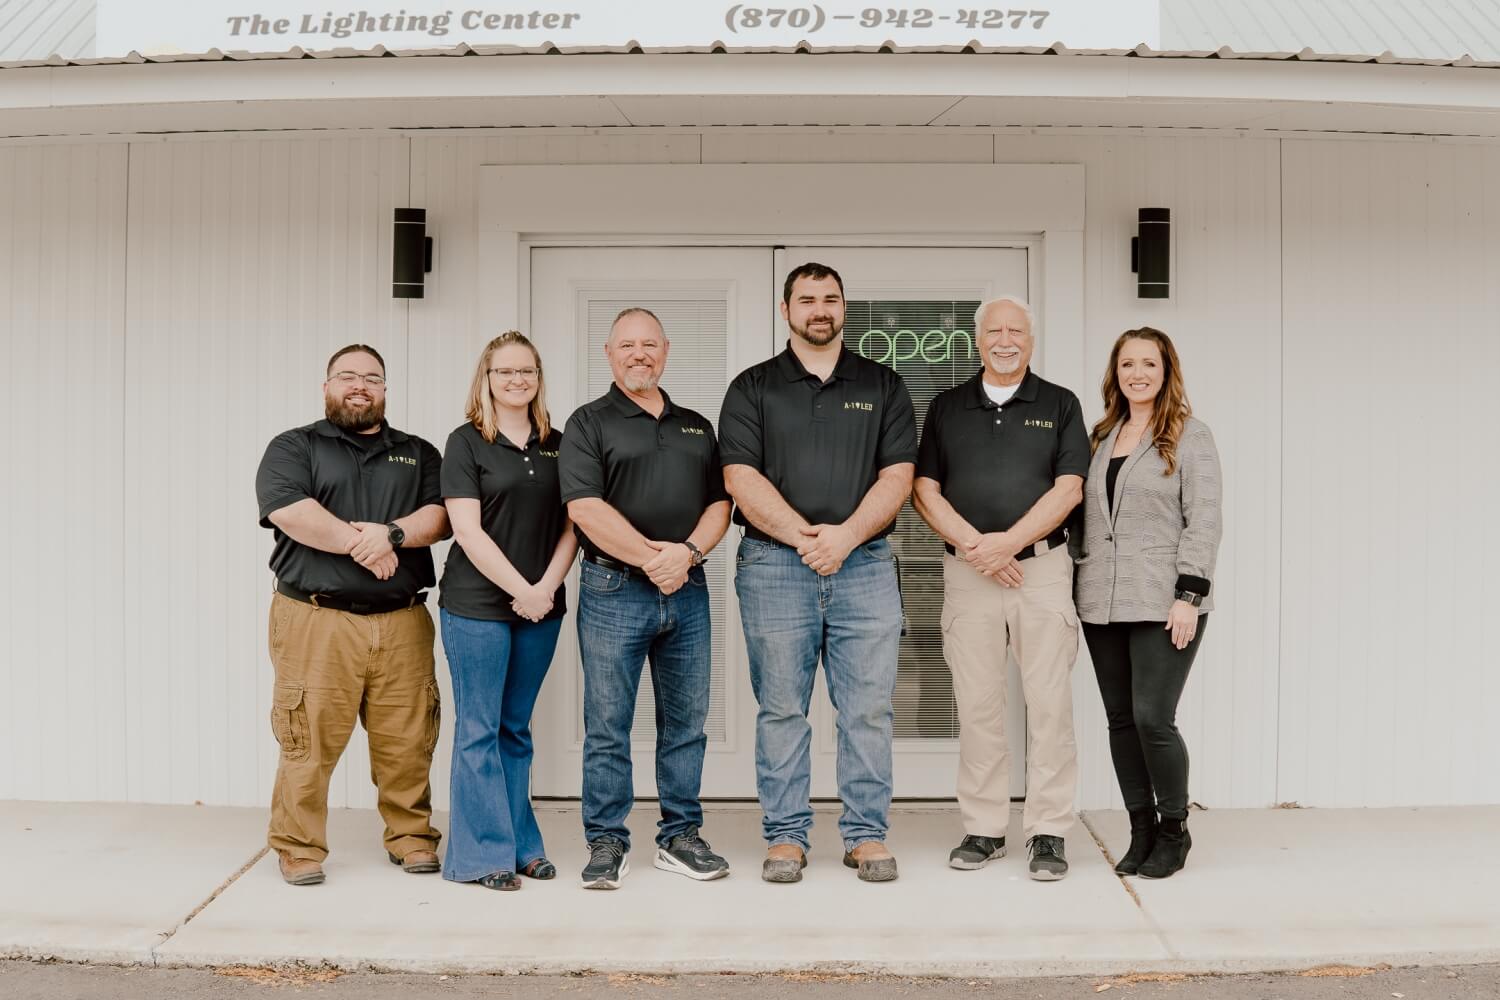 A-1 LED's executive team poses outside of our Sheridan, AR location wearing branded polos. We stand together ready to serve our local and regional customers. 